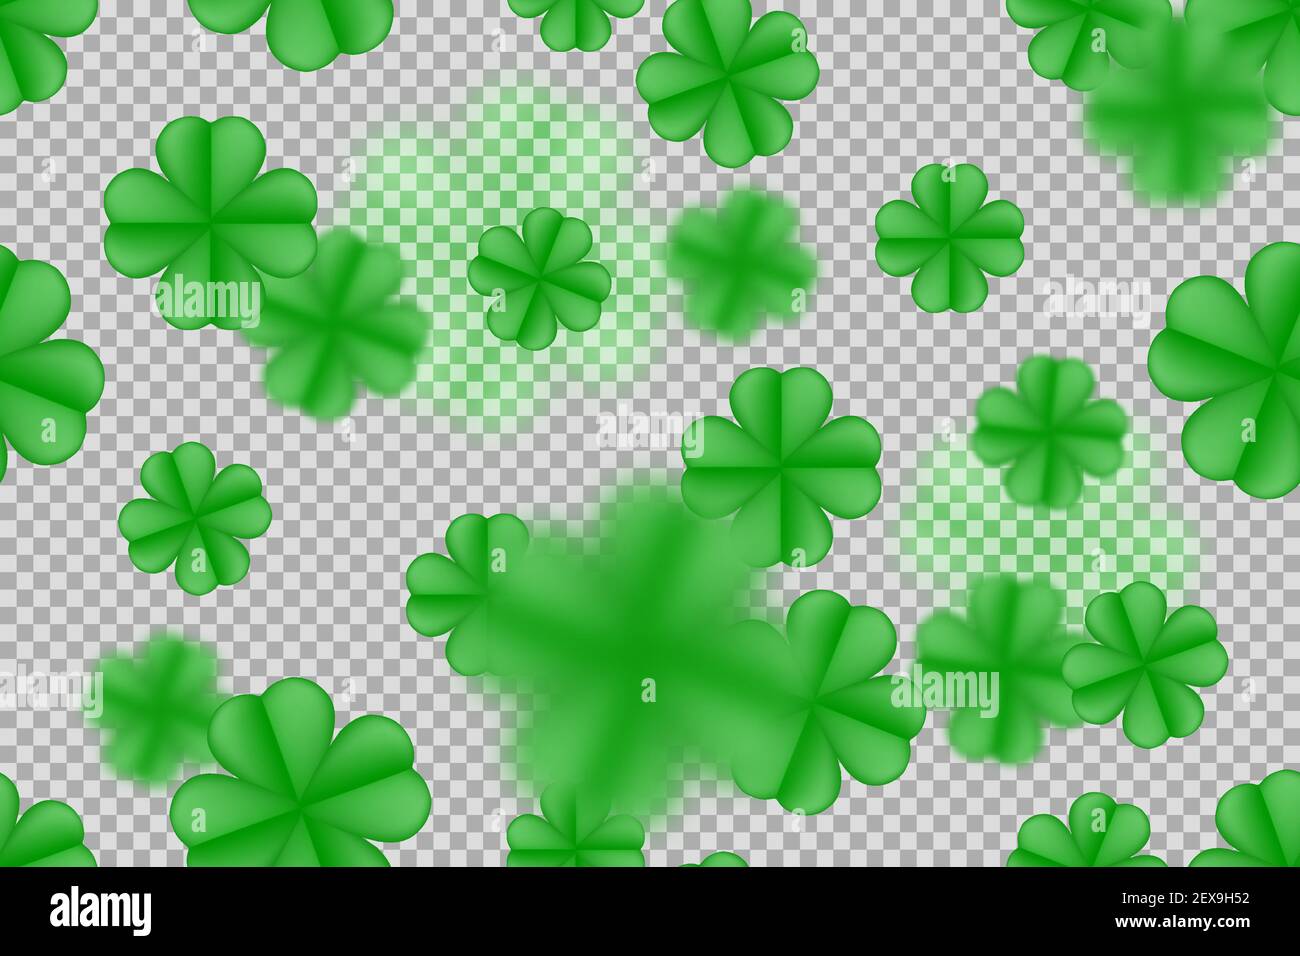 Green St. Patrick day seamless pattern on transparent background with clover four-leaf blured leaves. Vector overlay design. Stock Vector